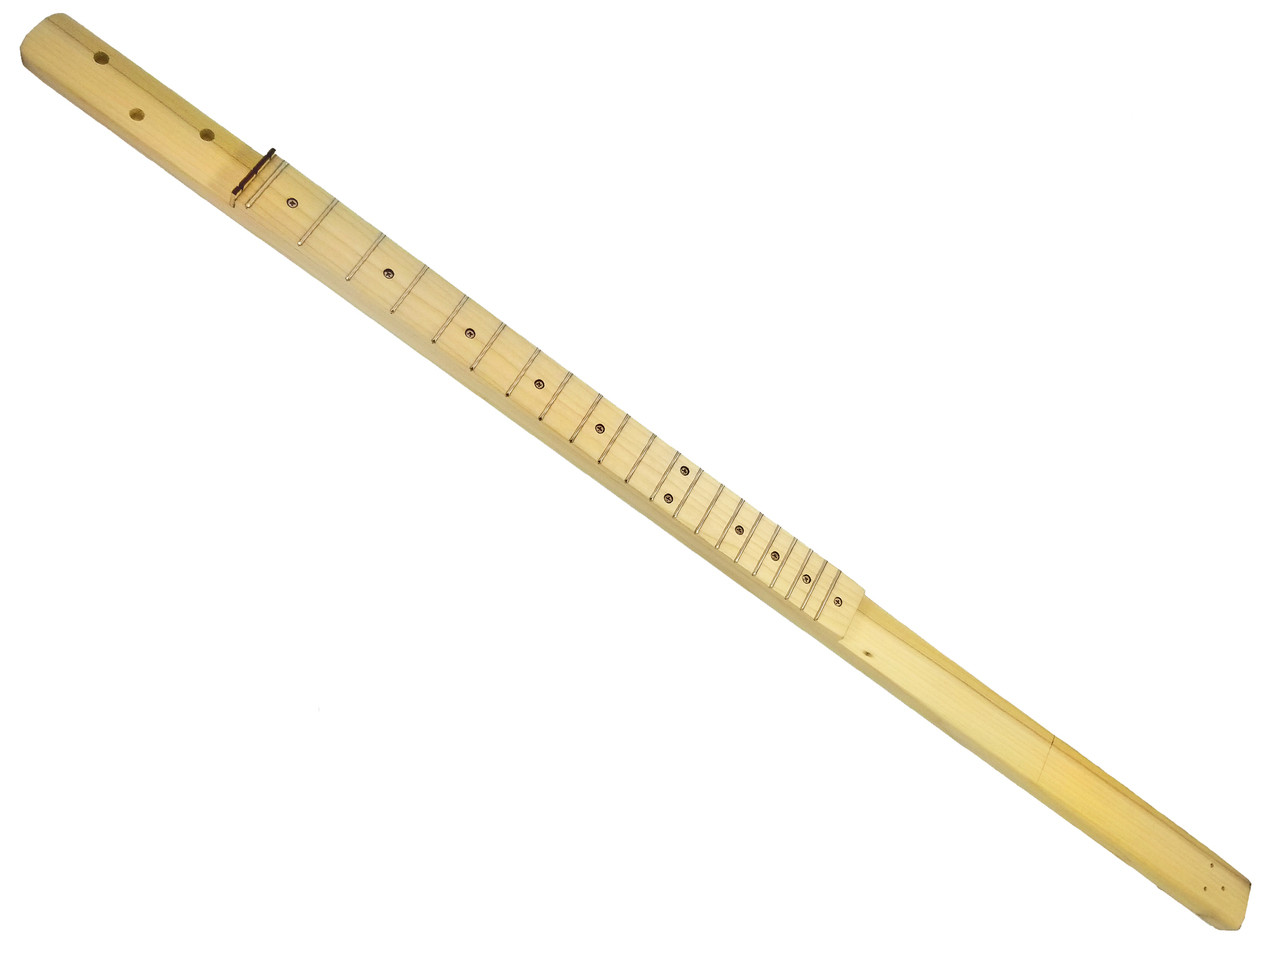 23-Inch Scale Fully Fretted Bolt-On Neck for 3-String Cigar Box Guitars and more